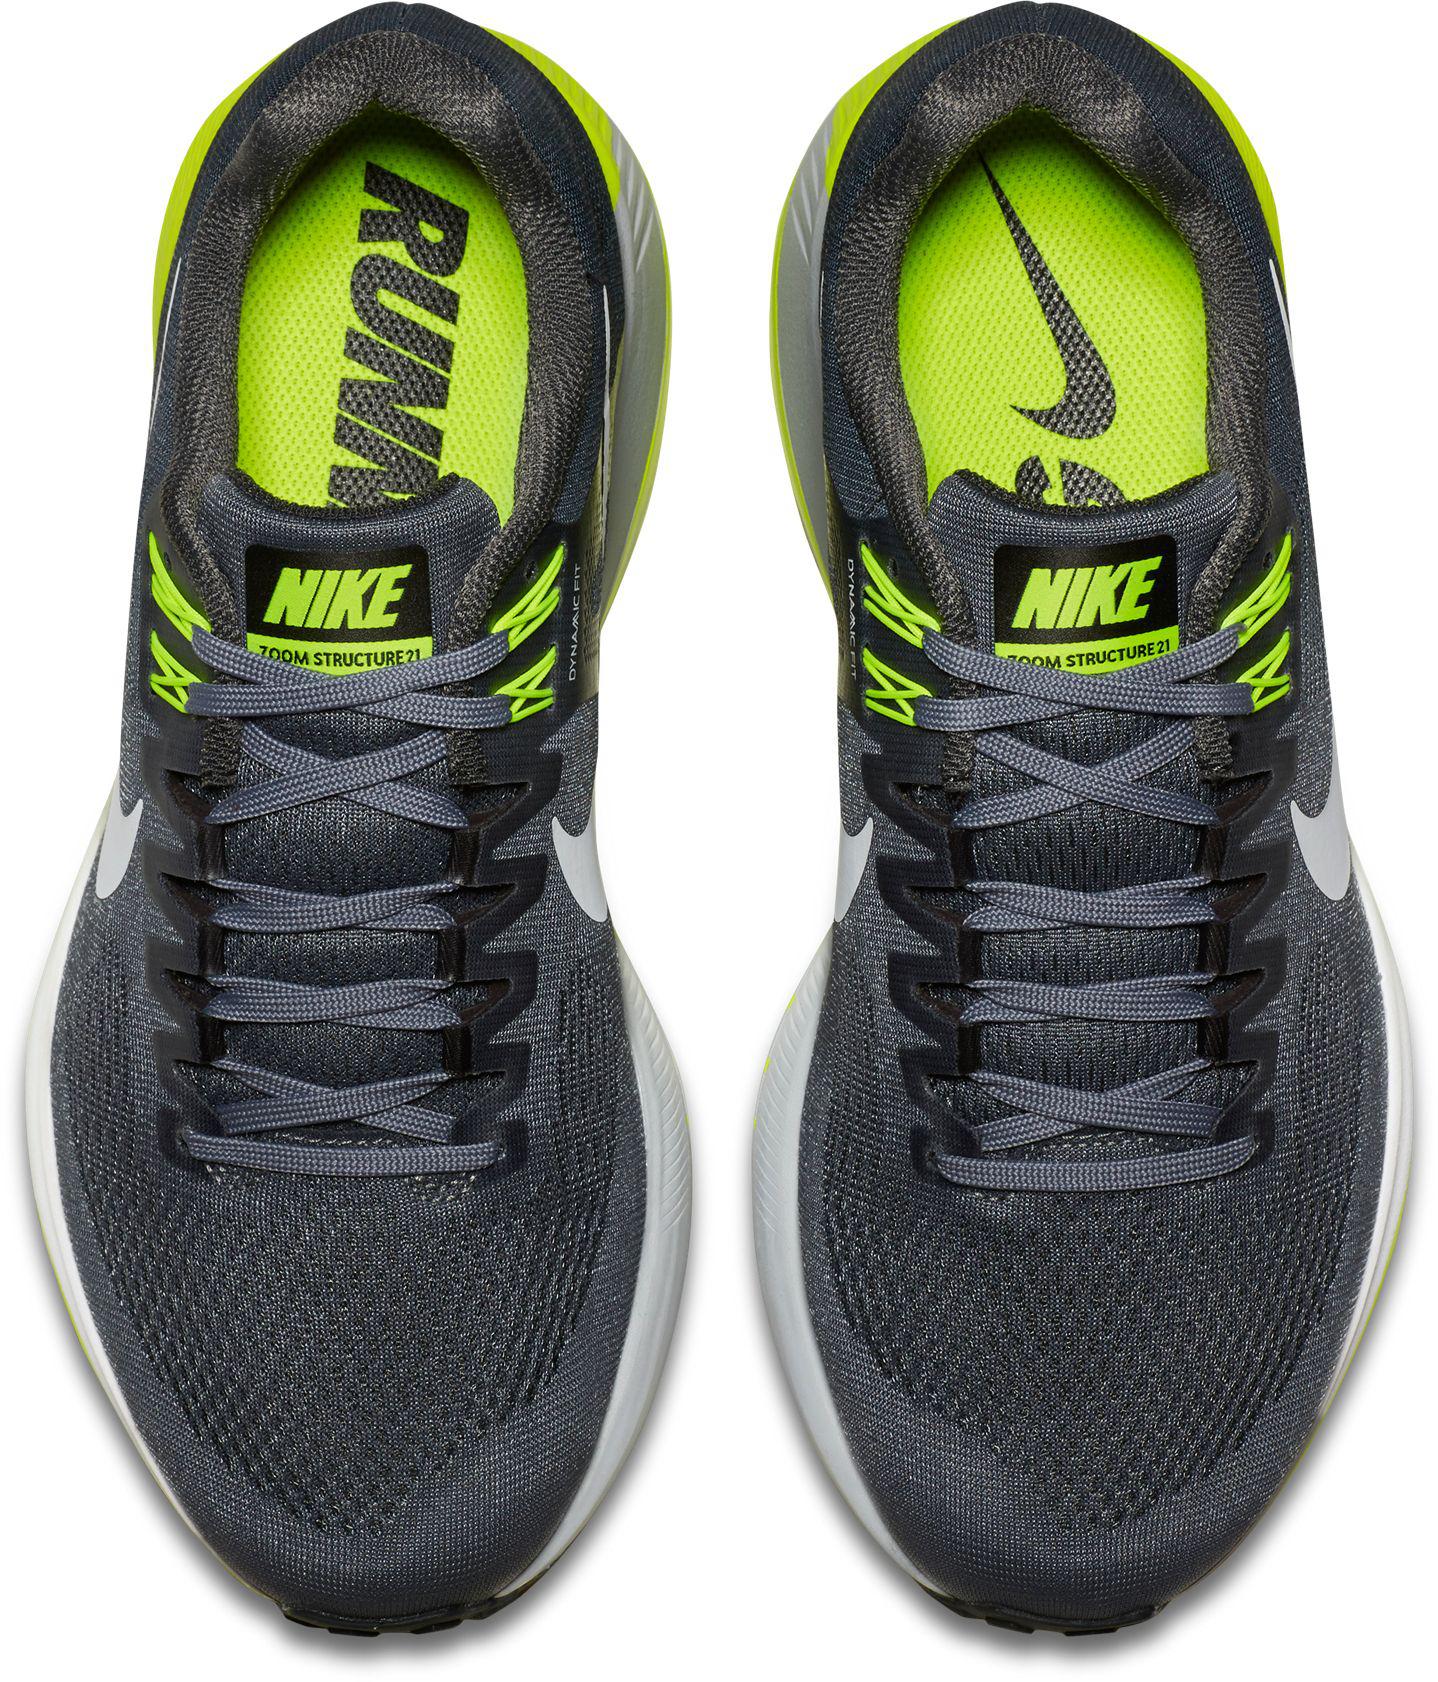 nike dynamic fit zoom structure 21